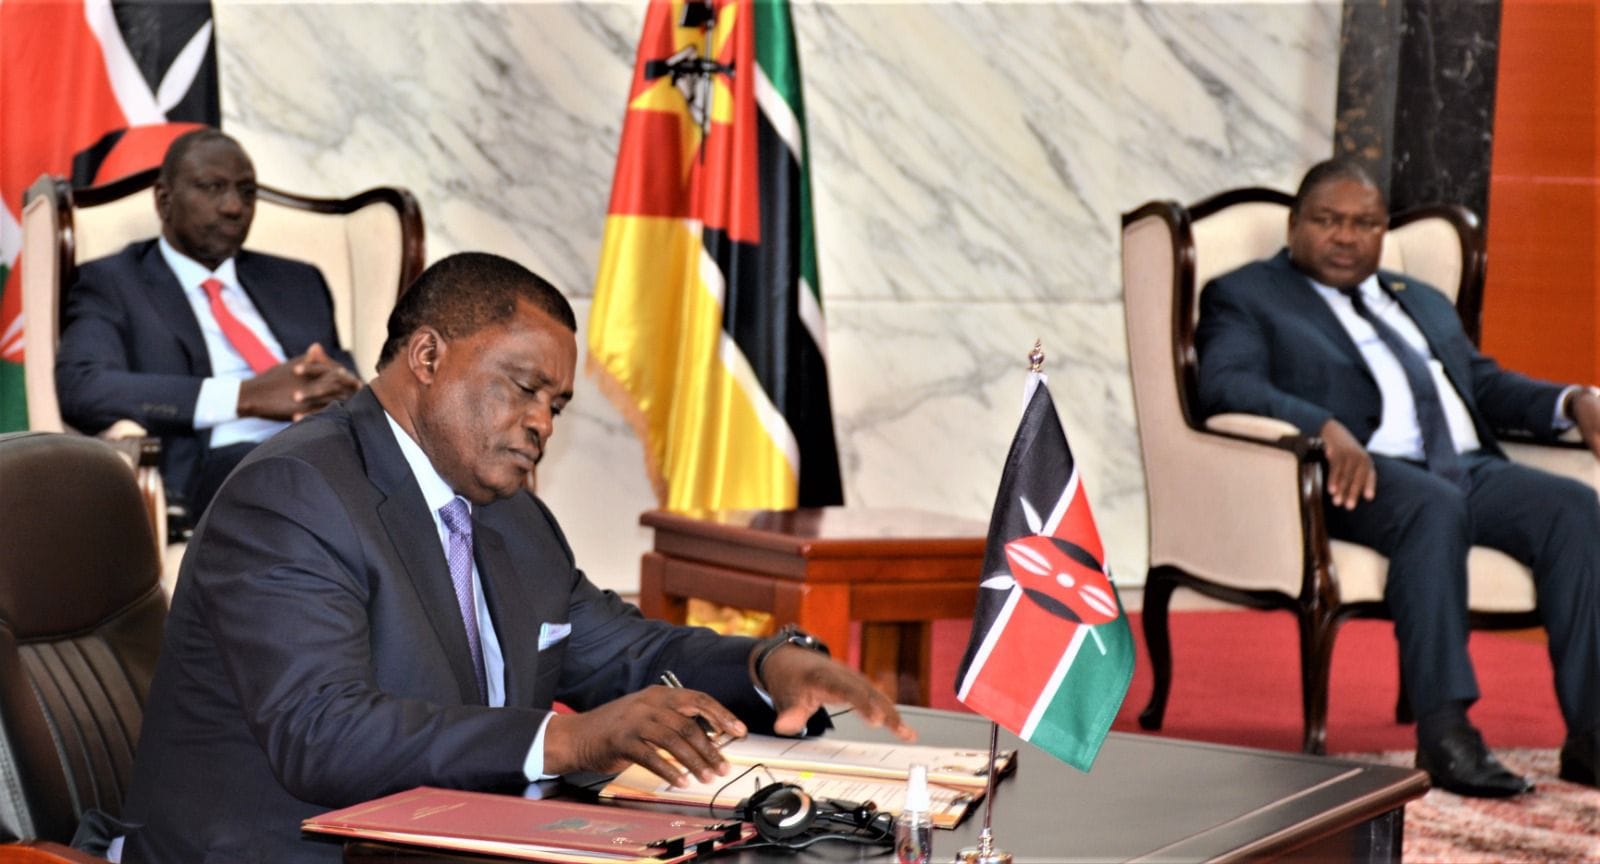 Kenya signed an agreement with Mozambique to fight transnational crimes